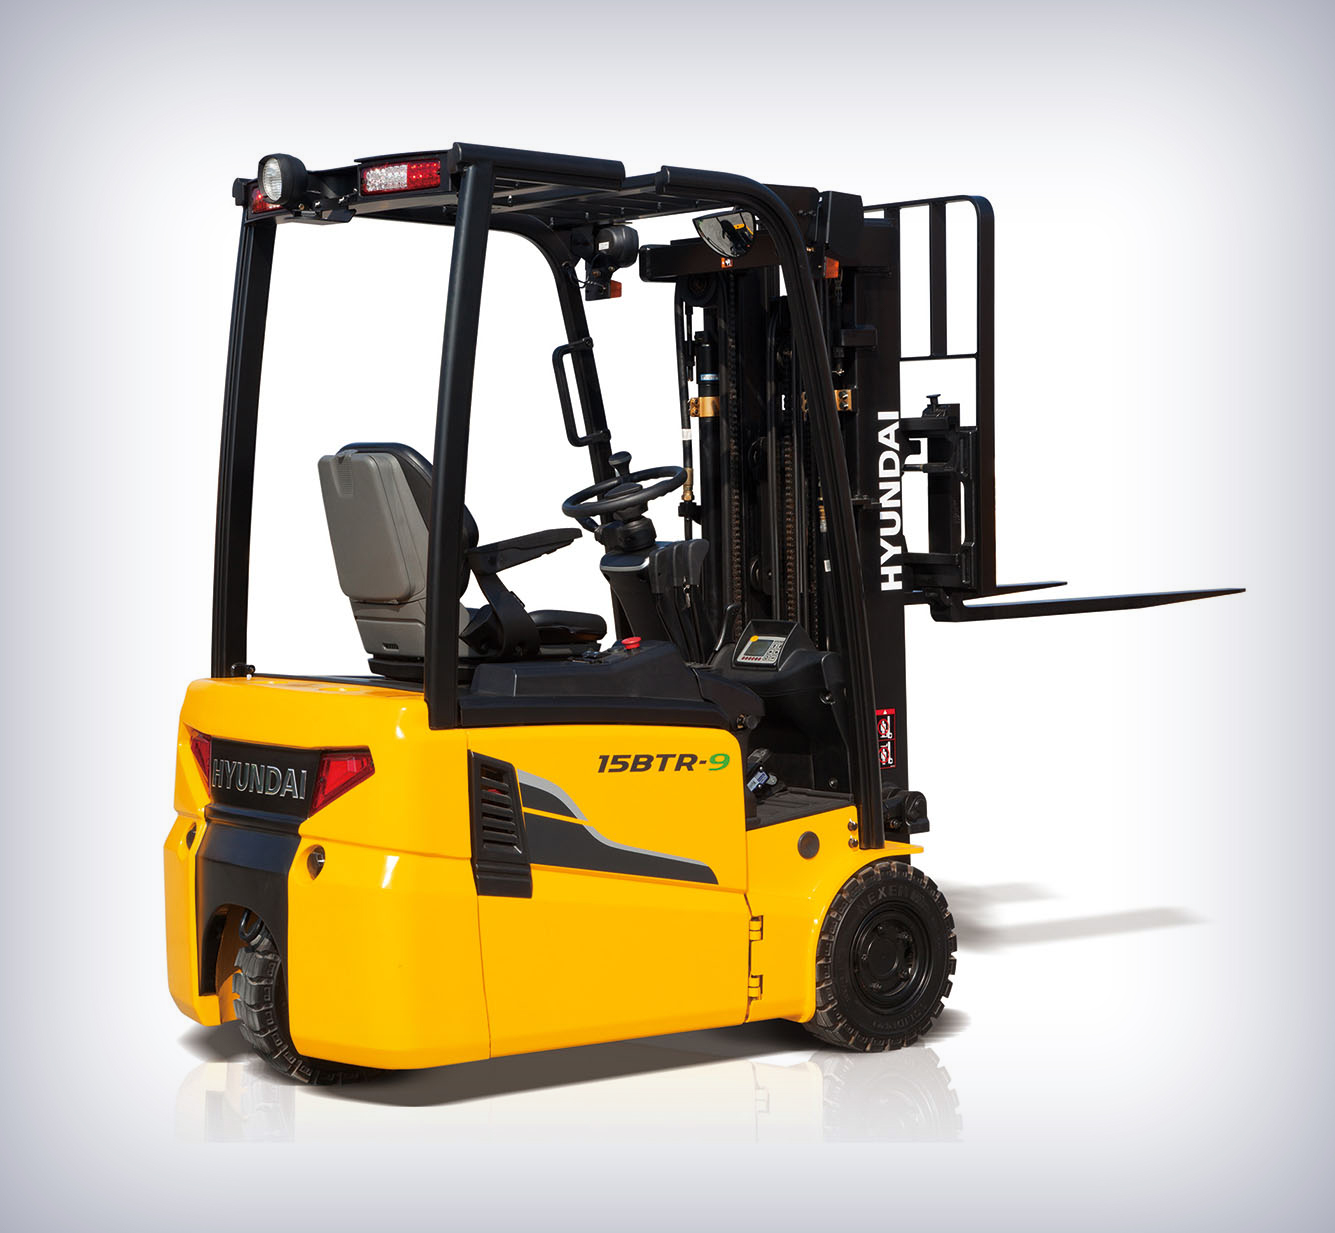 Forklift Design And Classifications How Forklifts Work Howstuffworks ...